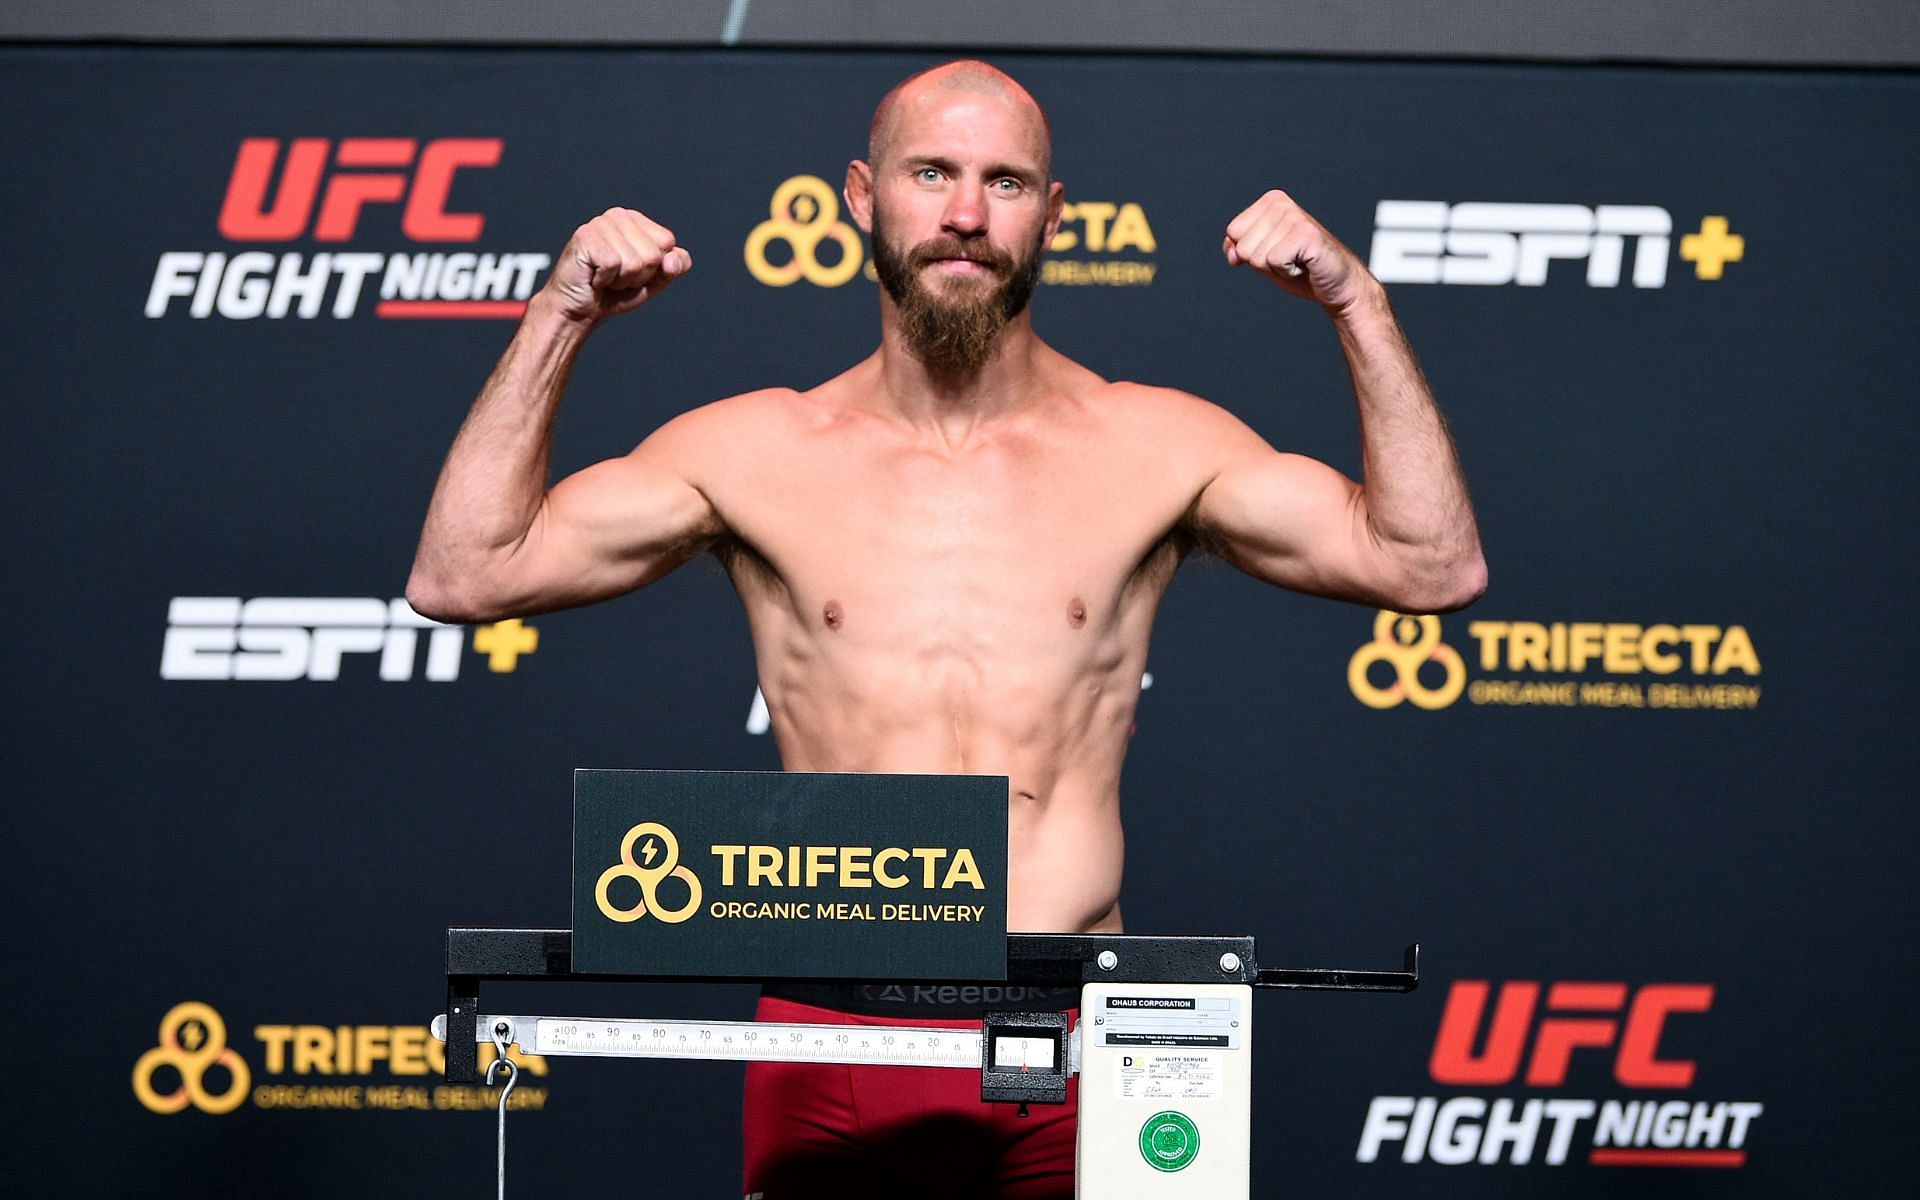 Former UFC lightweight title challenger and the holder of several records, Donald Cerrone, at an event&#039;s weigh-in ceremony